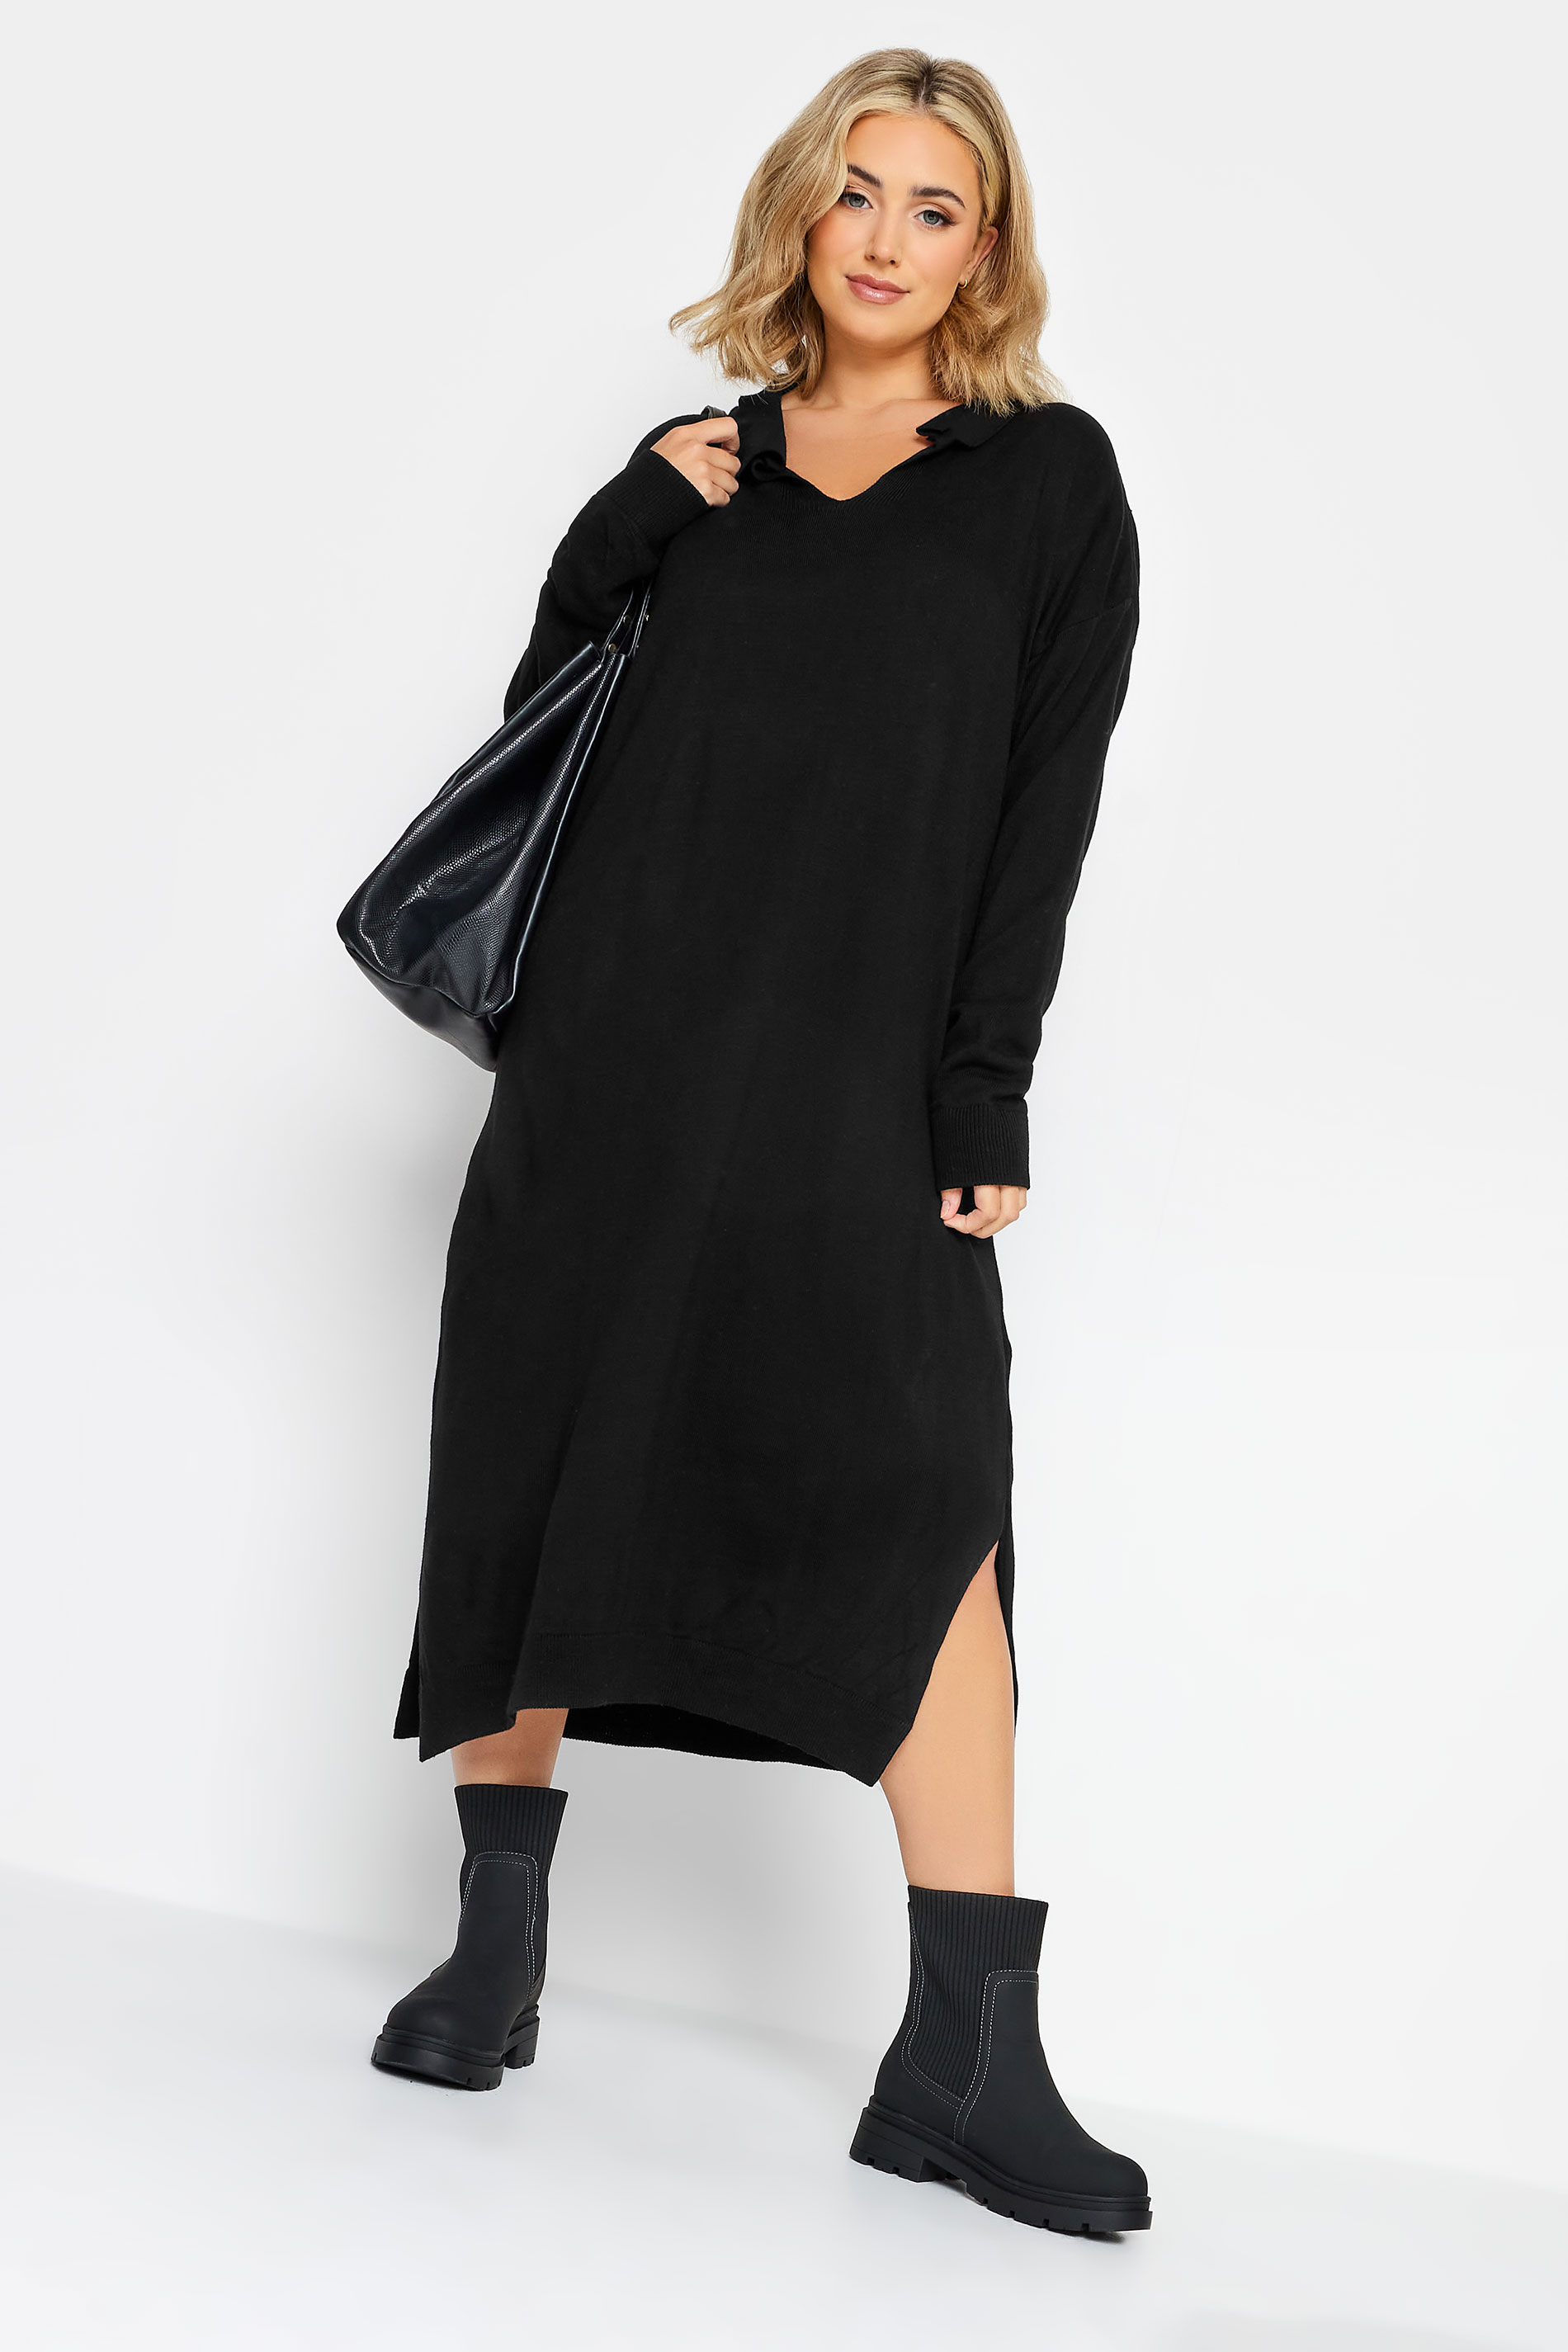 Plus Size Black Open Collar Knitted Jumper Dress | Yours Clothing 2